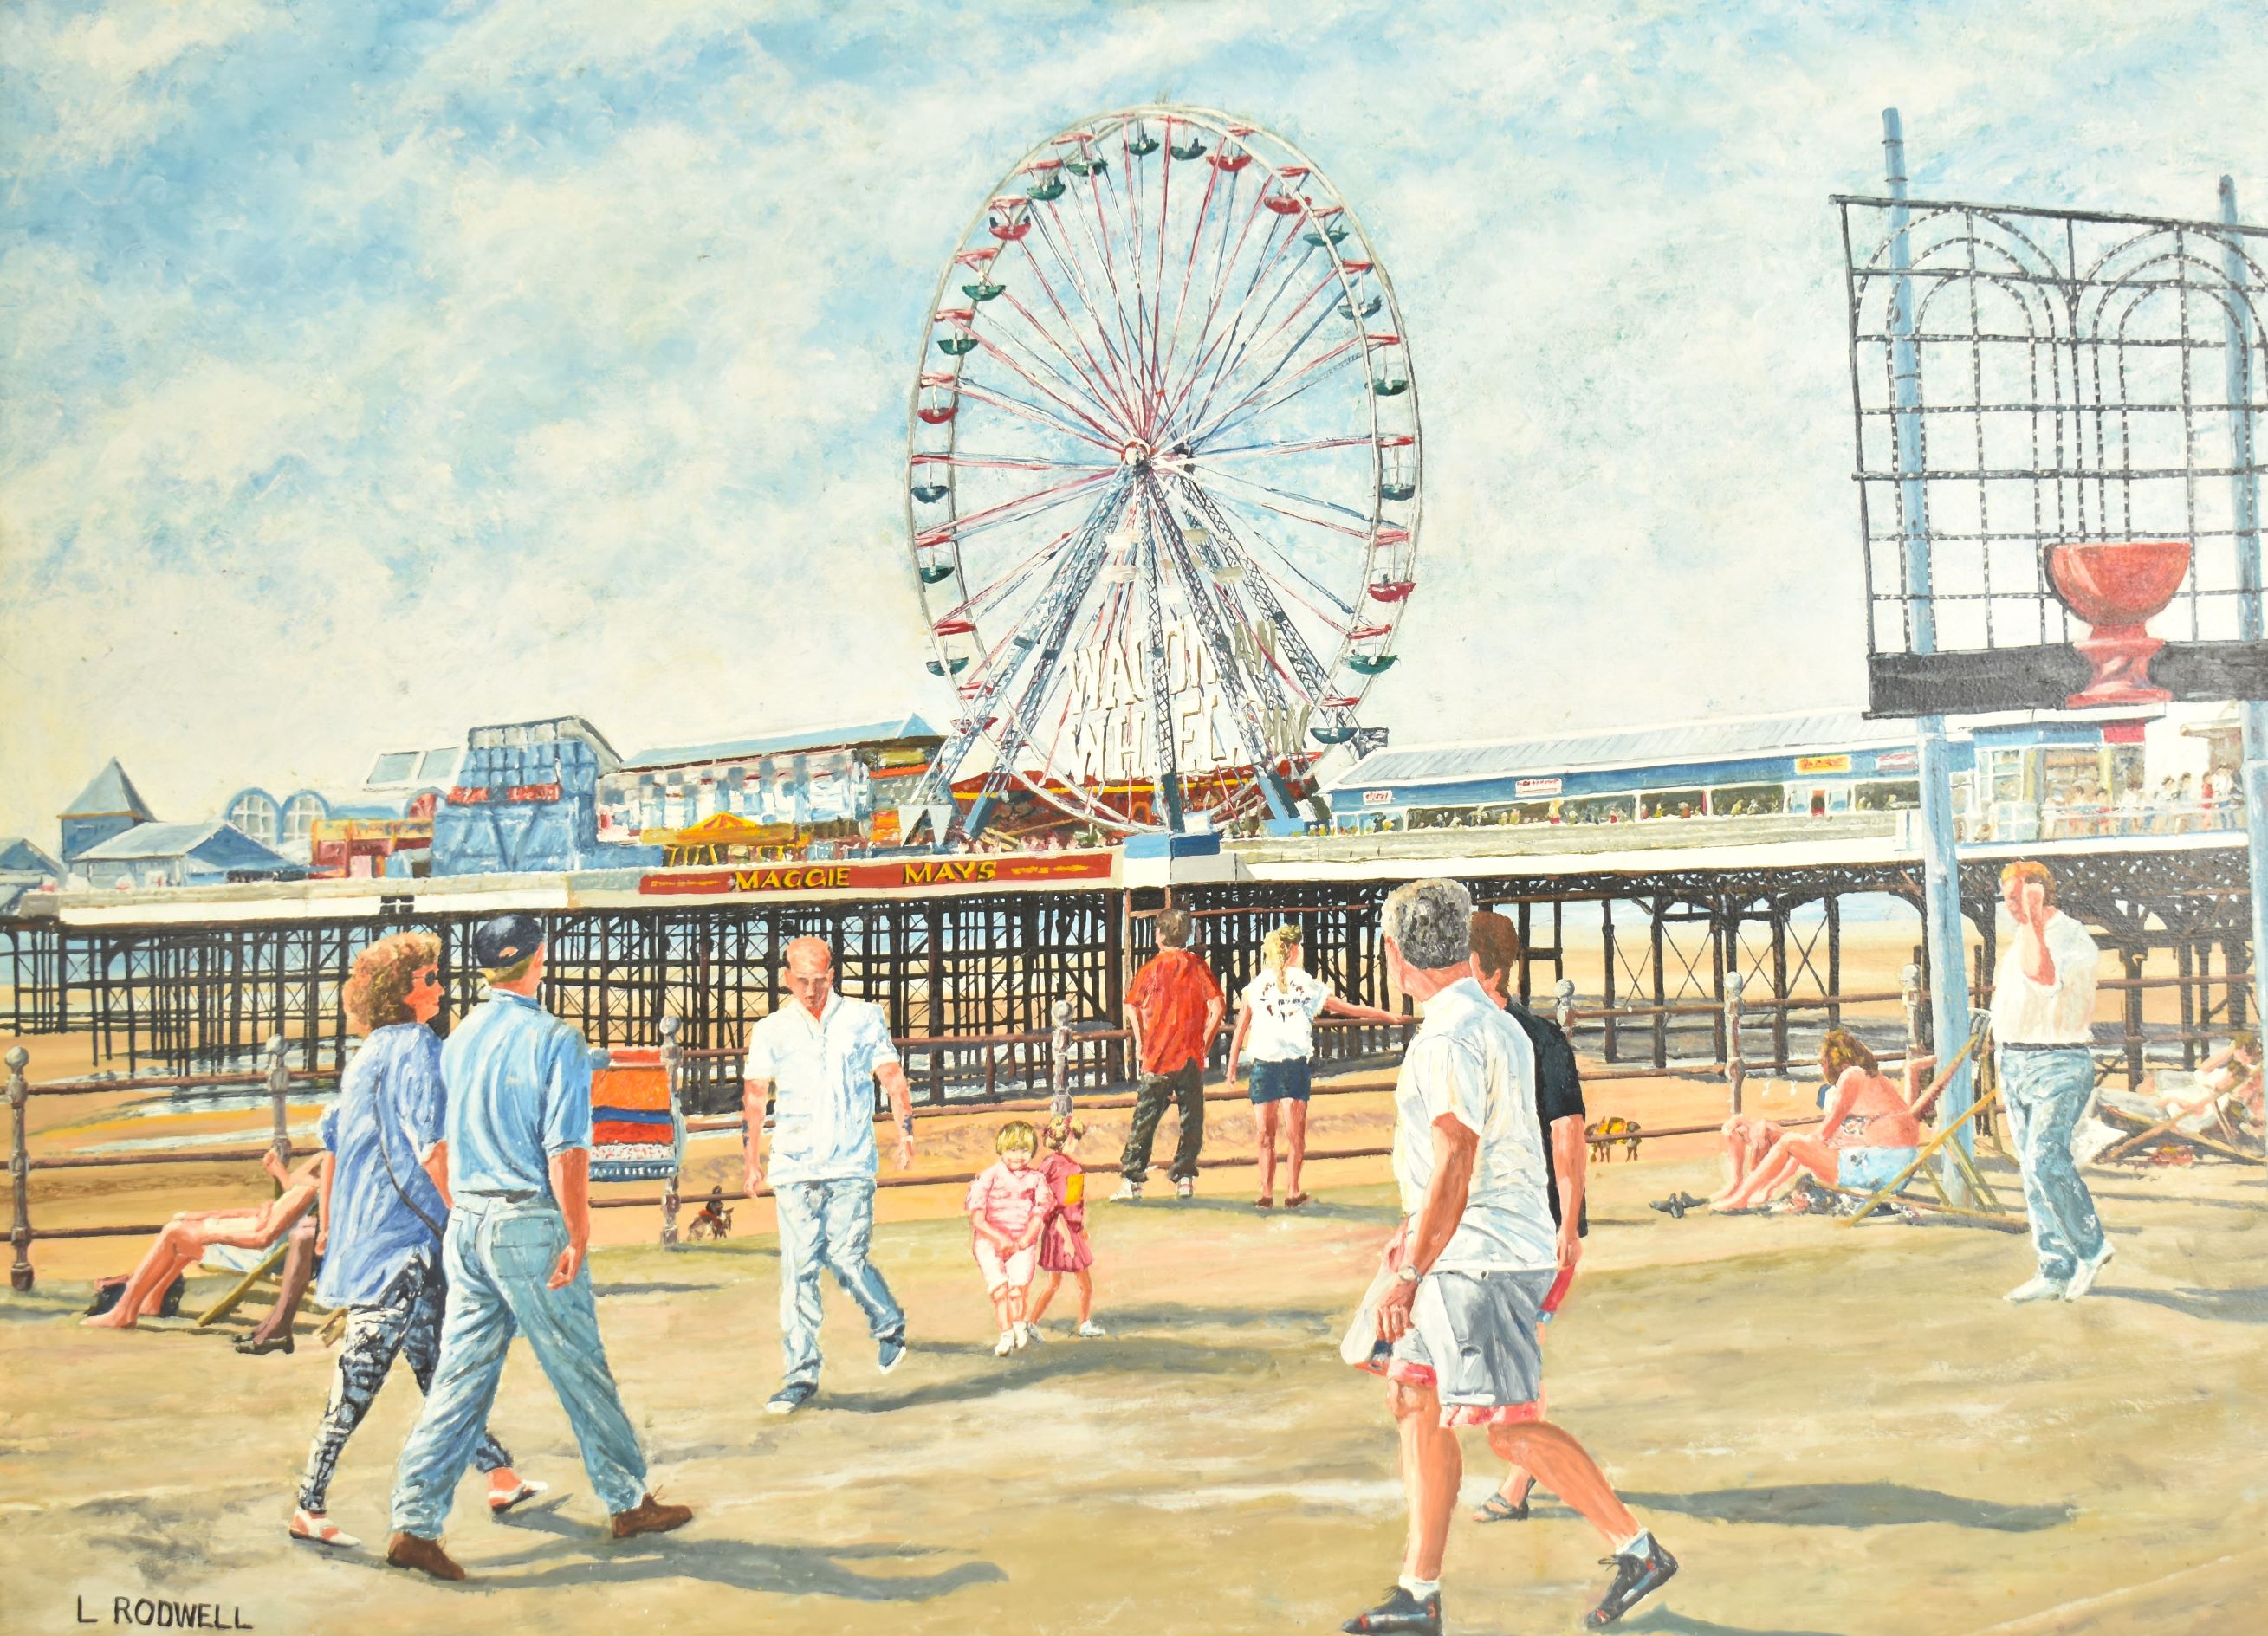 Timed Auction of Artwork by Blackpool Artist Leonard Rodwell (Garstang)